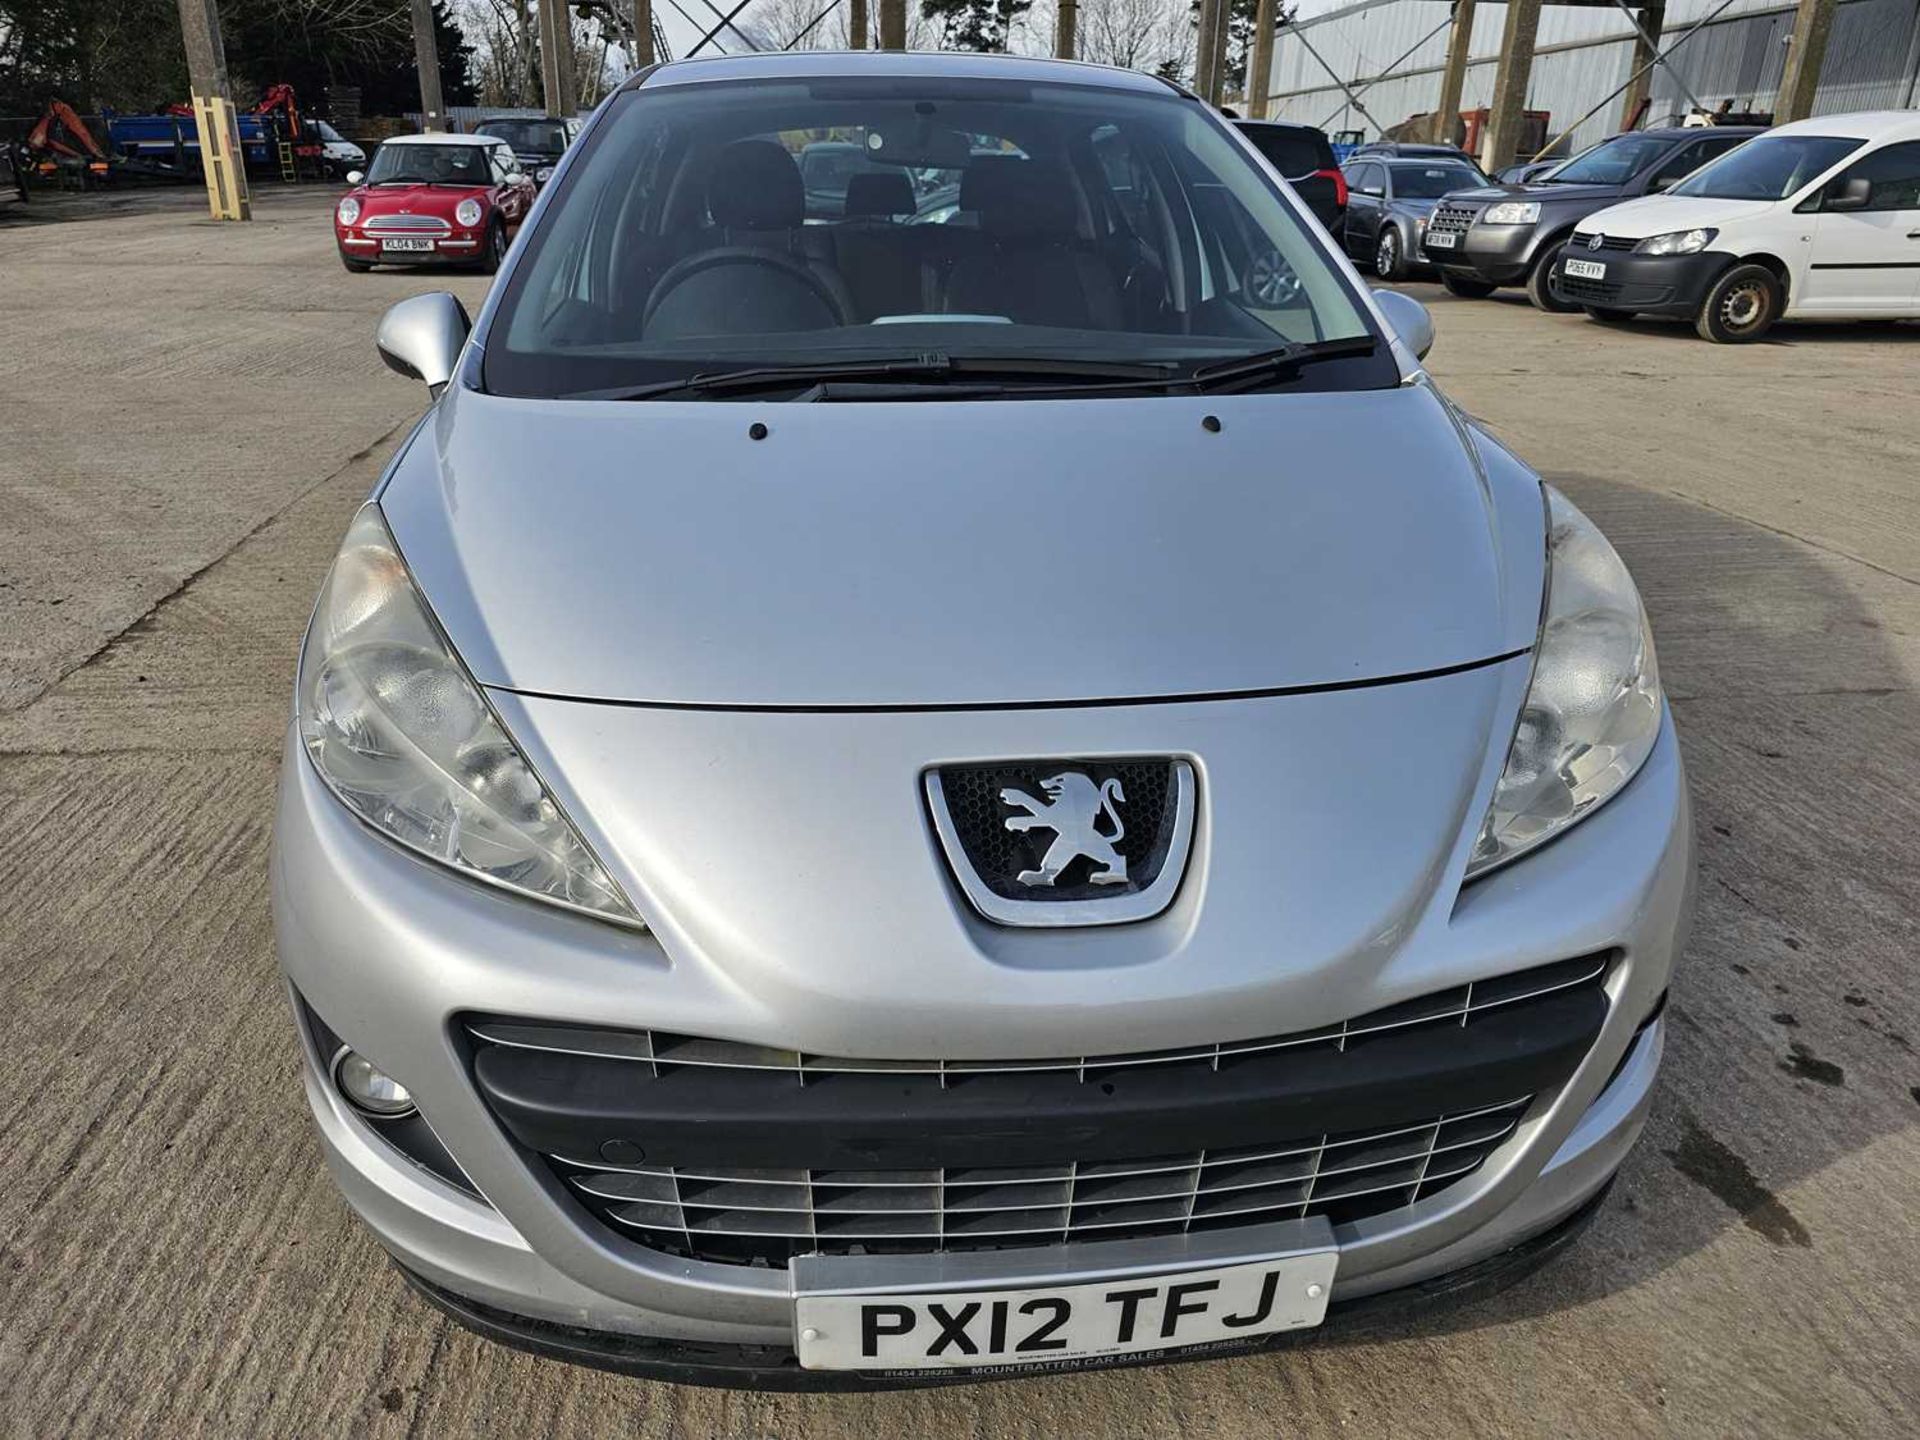 2012 Peugeot 207, 5 Speed, A/C (Reg. Docs. Available, Tested 06/24) - Image 7 of 28